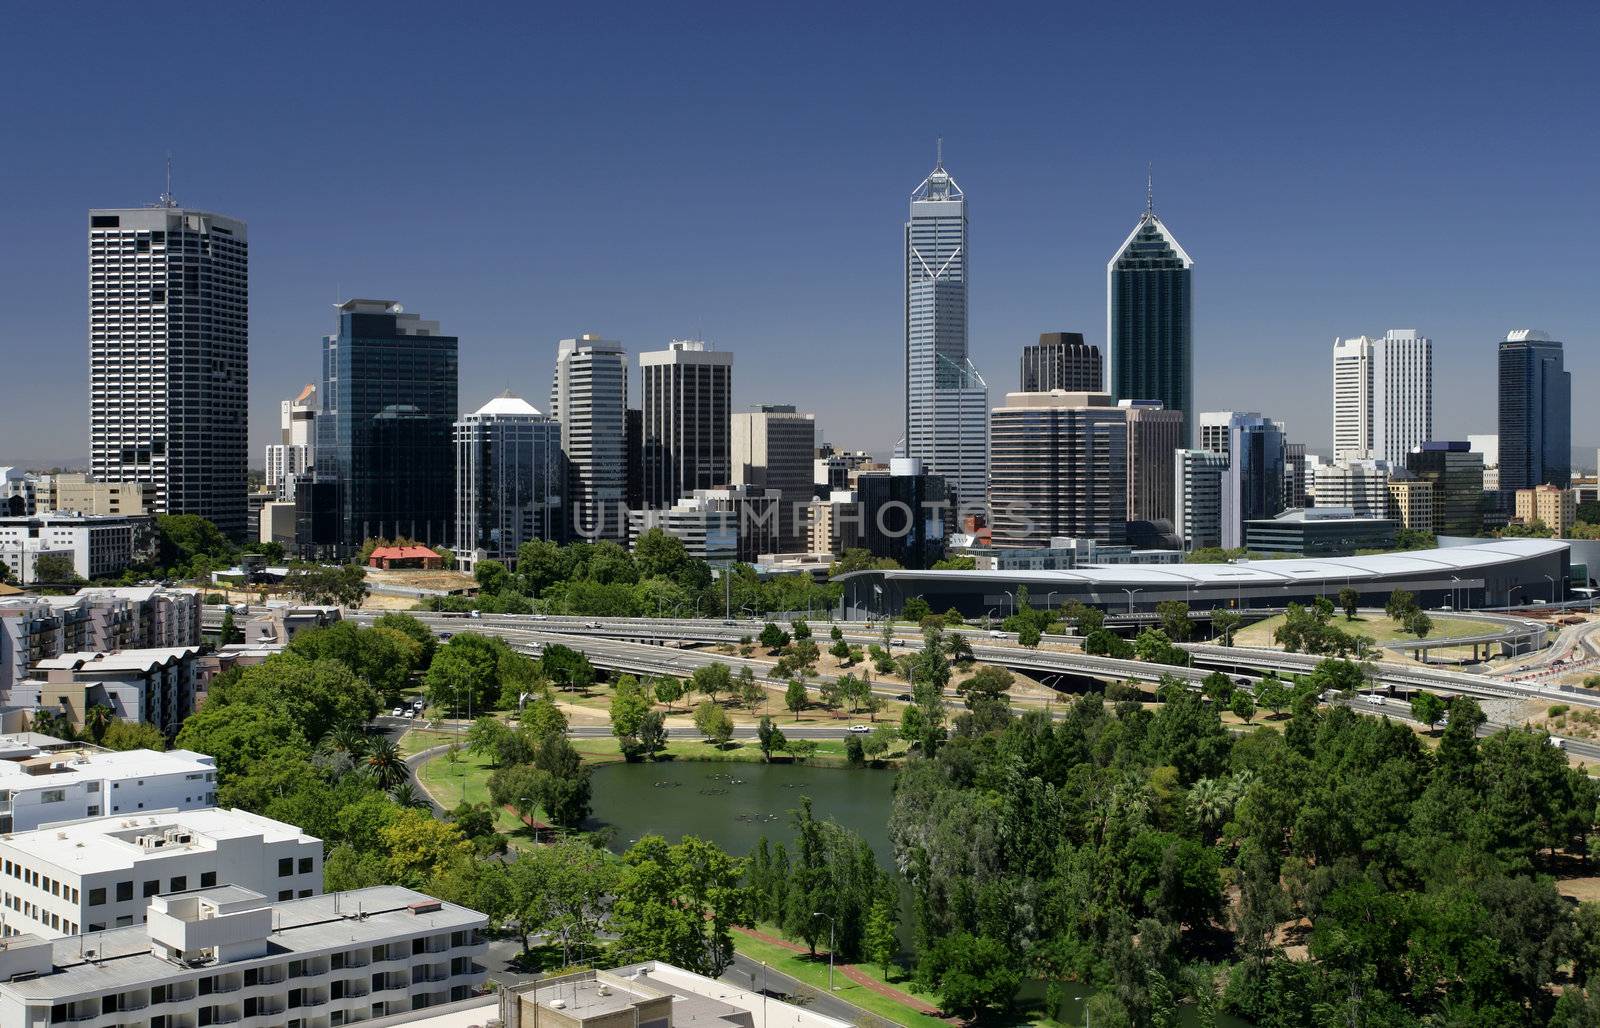 A view of the city of Perth - Western Australia
